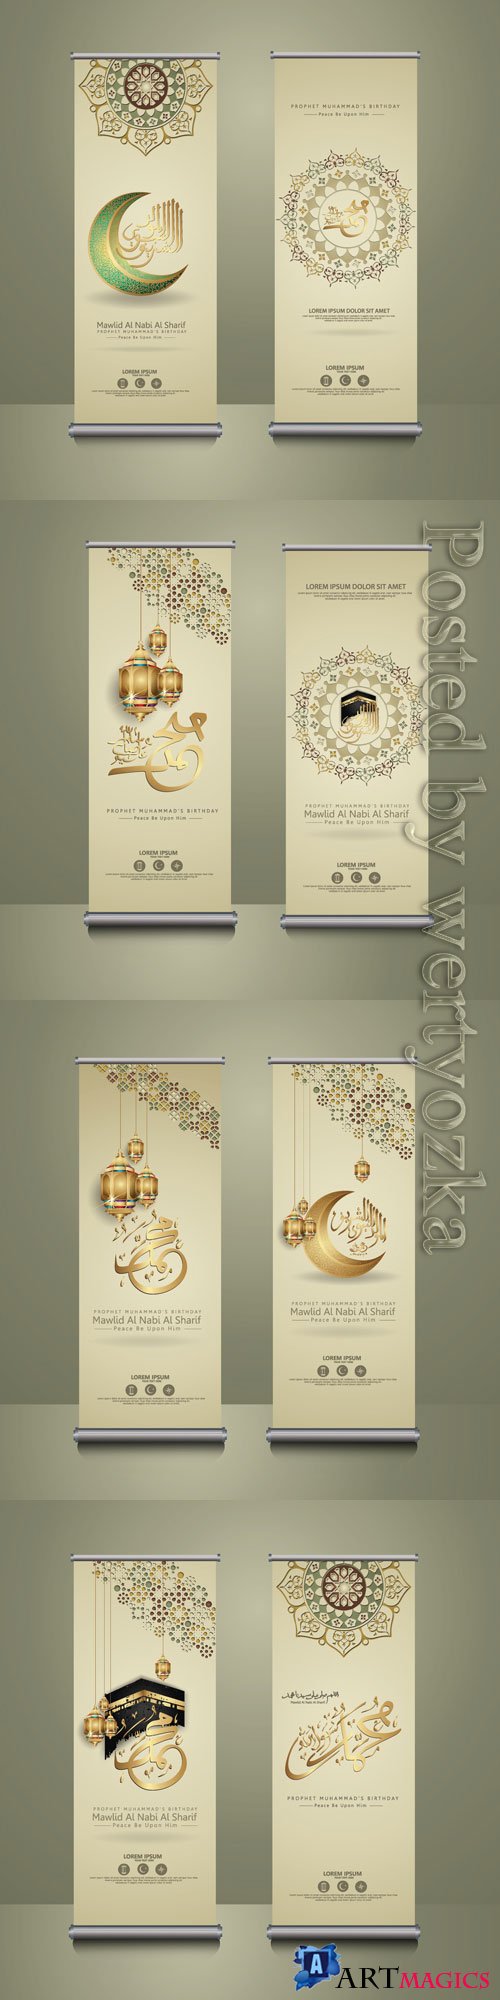 Roll up banner, prophet Muhammad in arabic calligraphy with golden Islamic ornamental